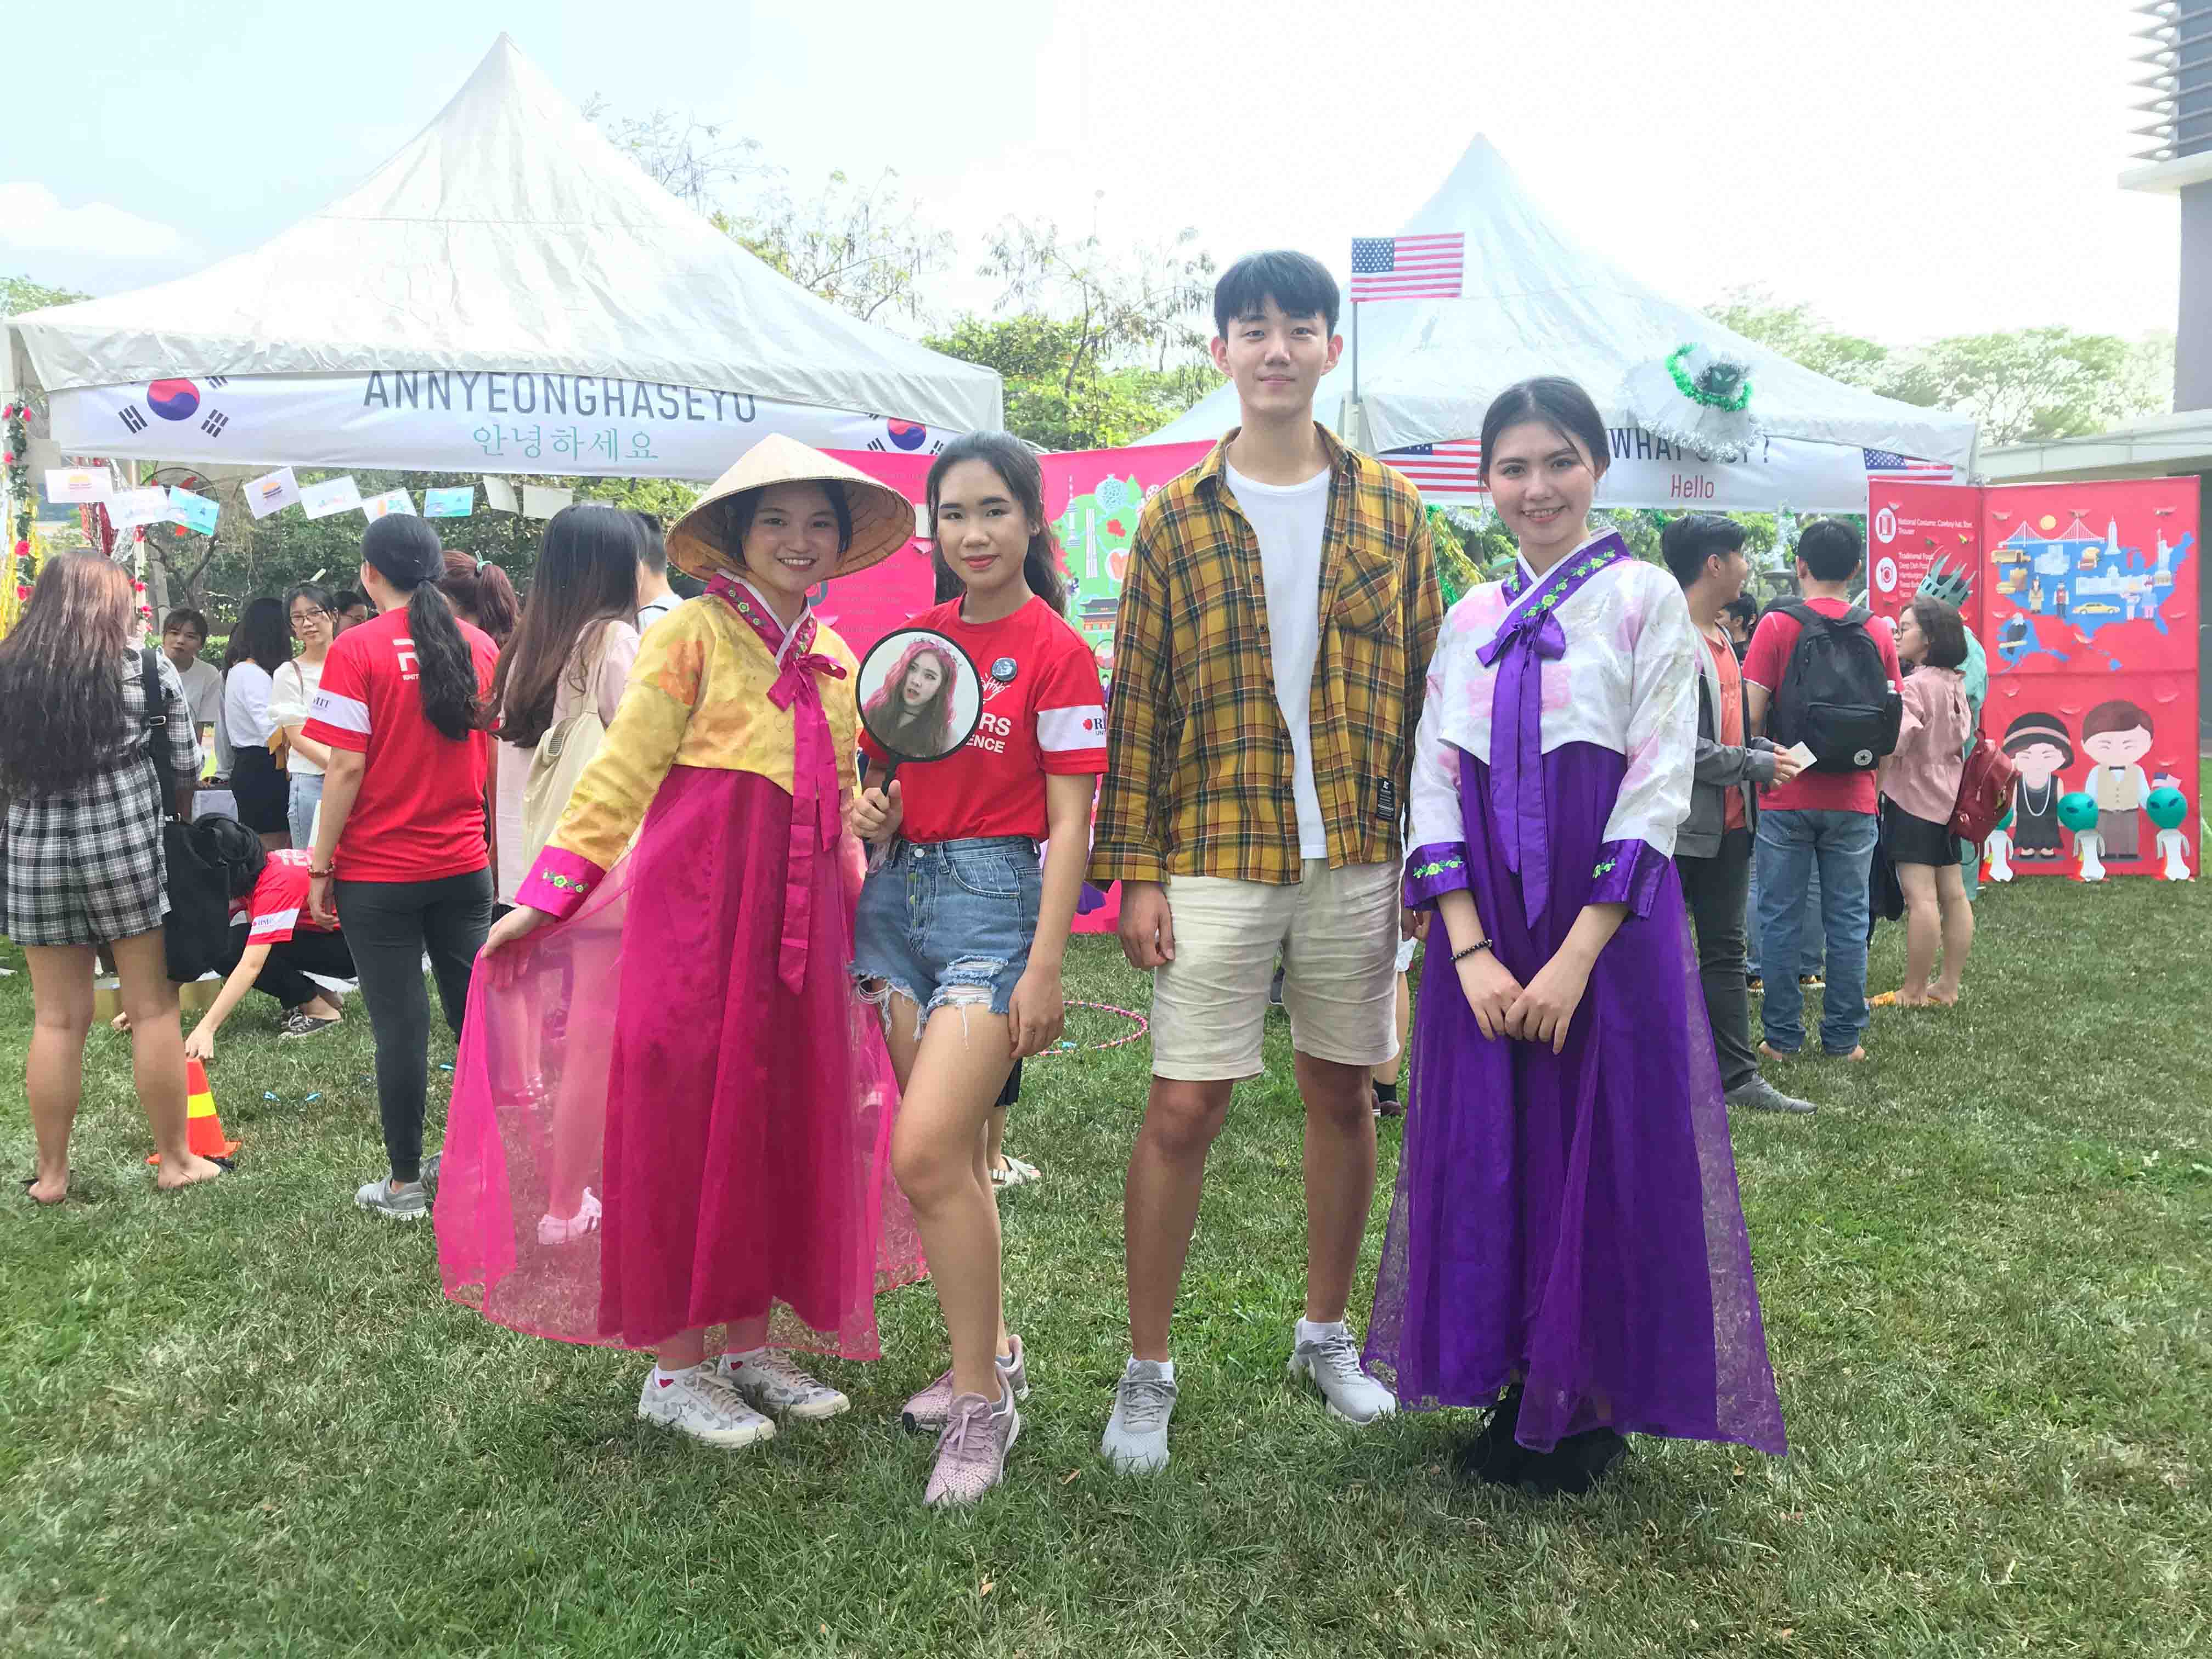 RMIT’s Bachelor of Information Technology student Sang Yeon Lee (in checkered shirt) attended the RMIT International Festival 2019 with Vietnamese students.